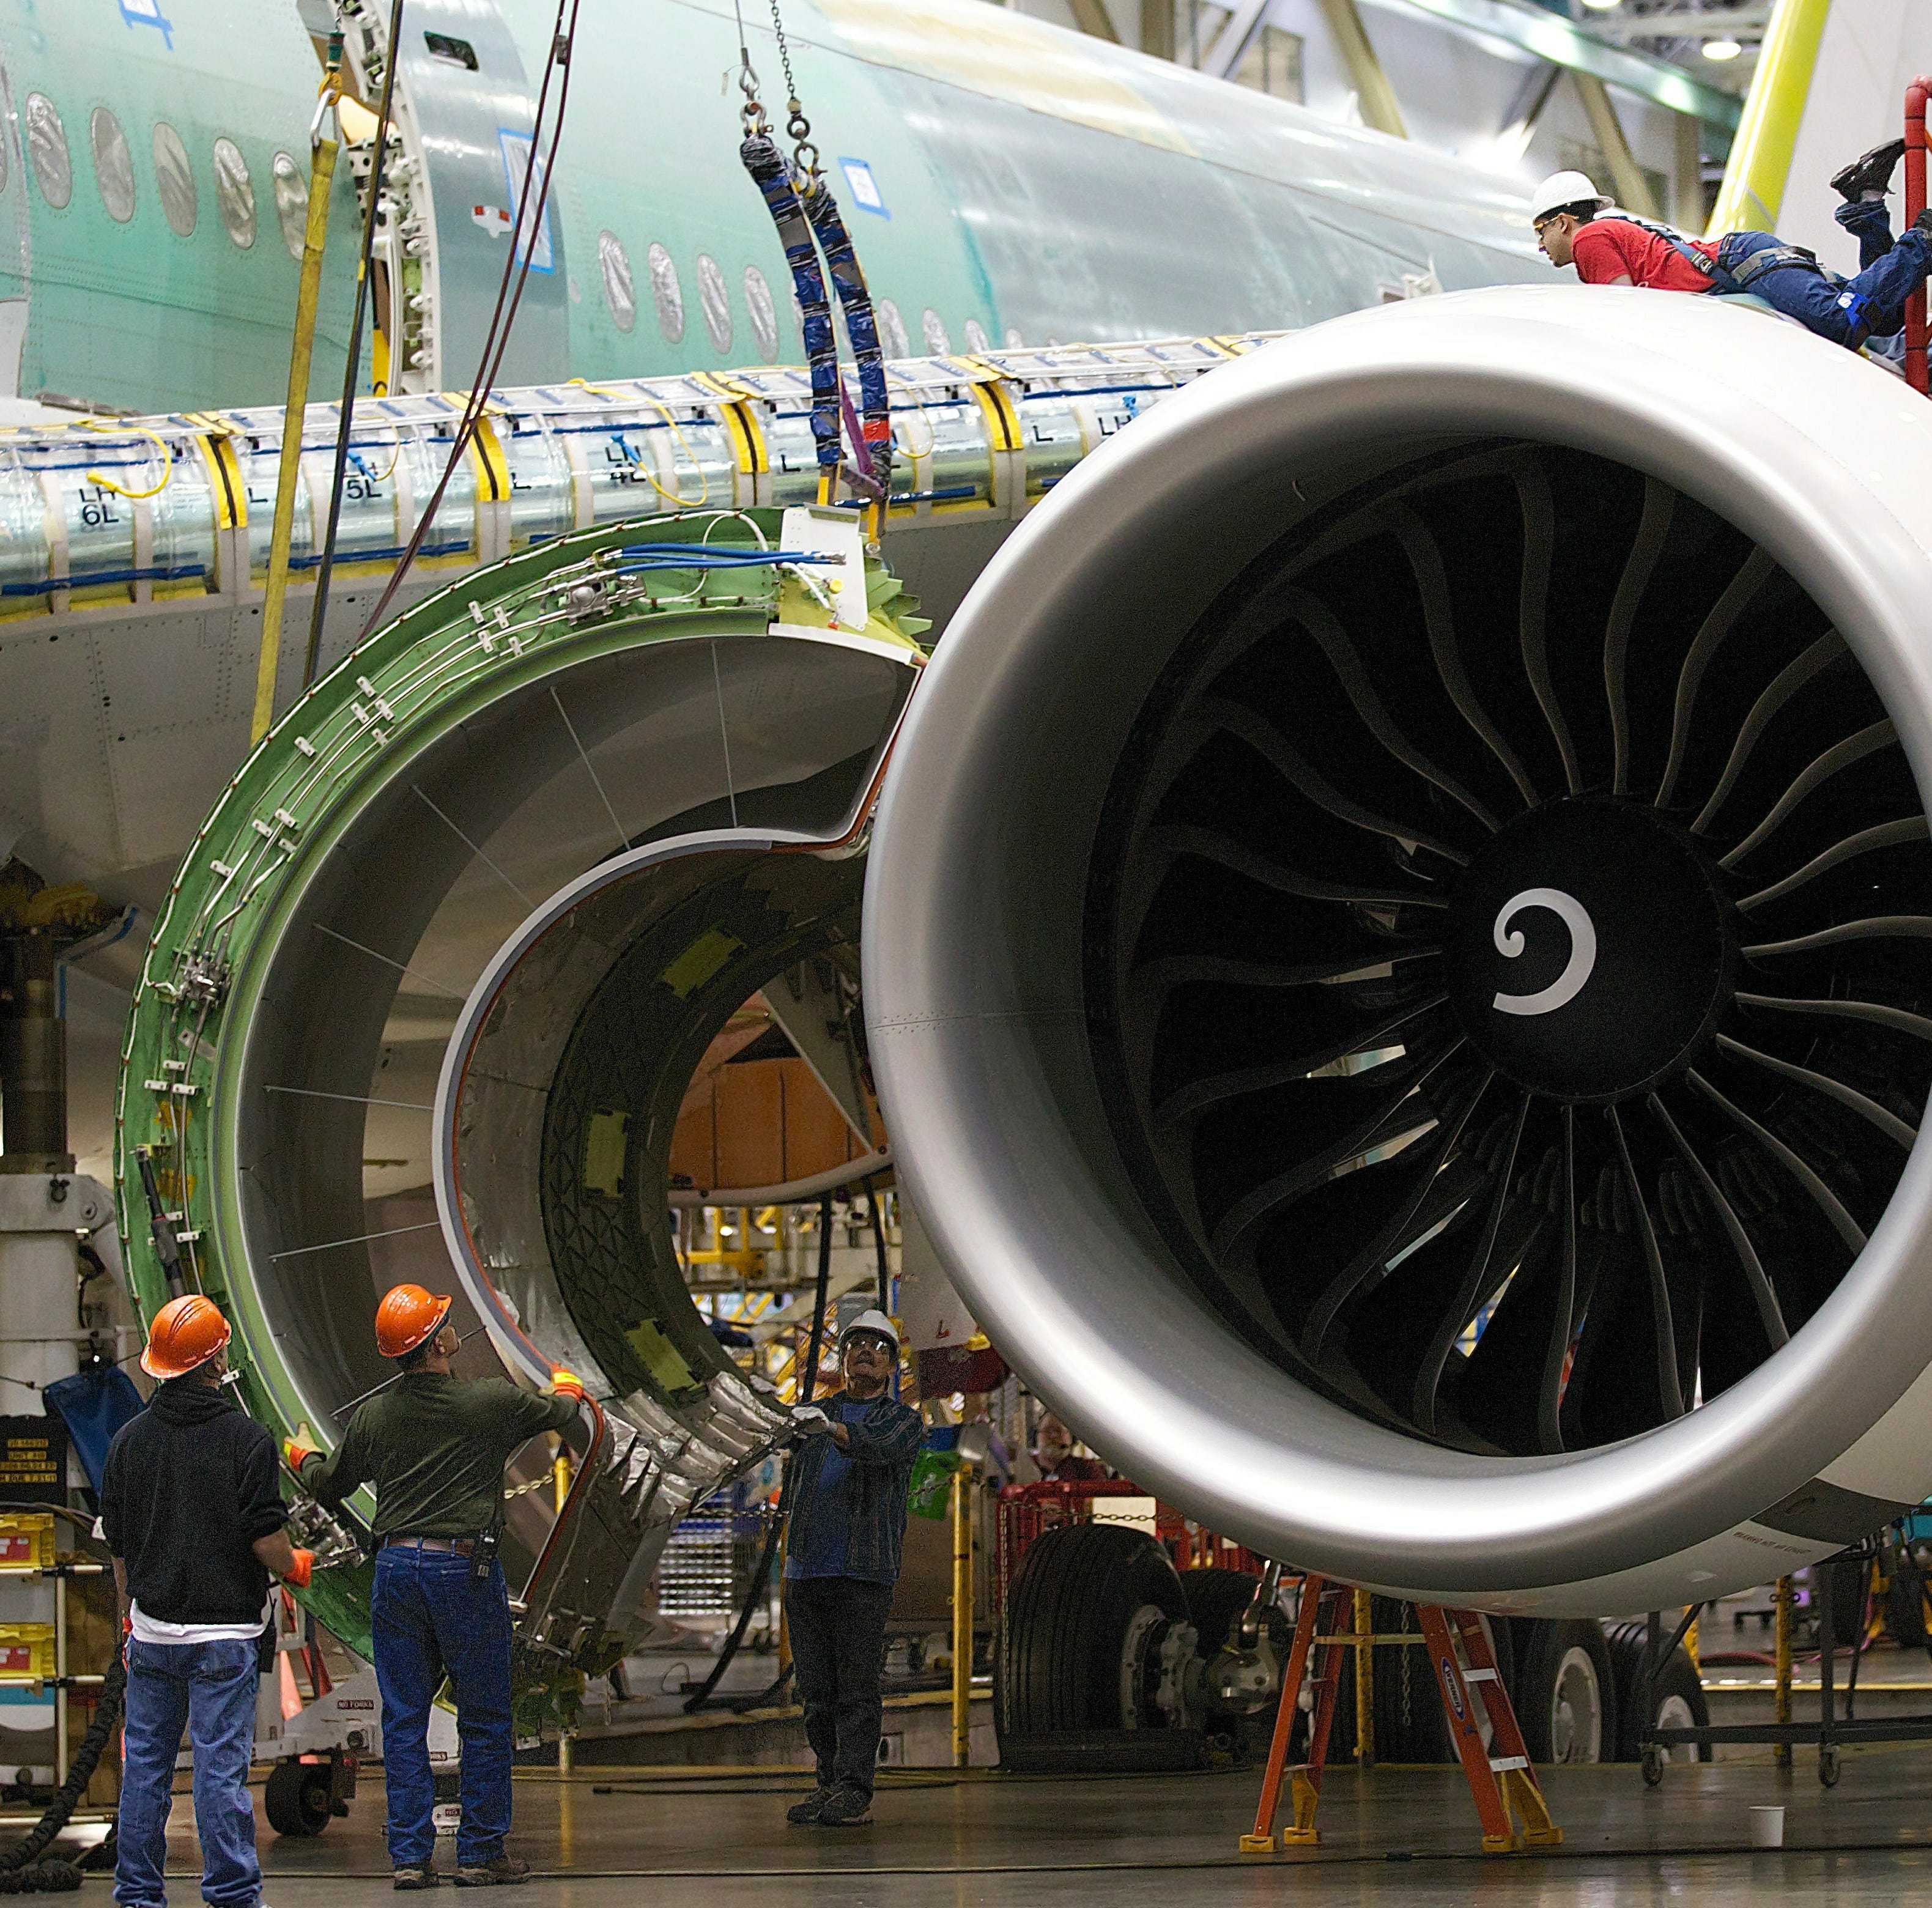 Boeing employees prepare to install an engine cowling on a Boeing 777 passenger plane at the company's factory in Everett, Washington.